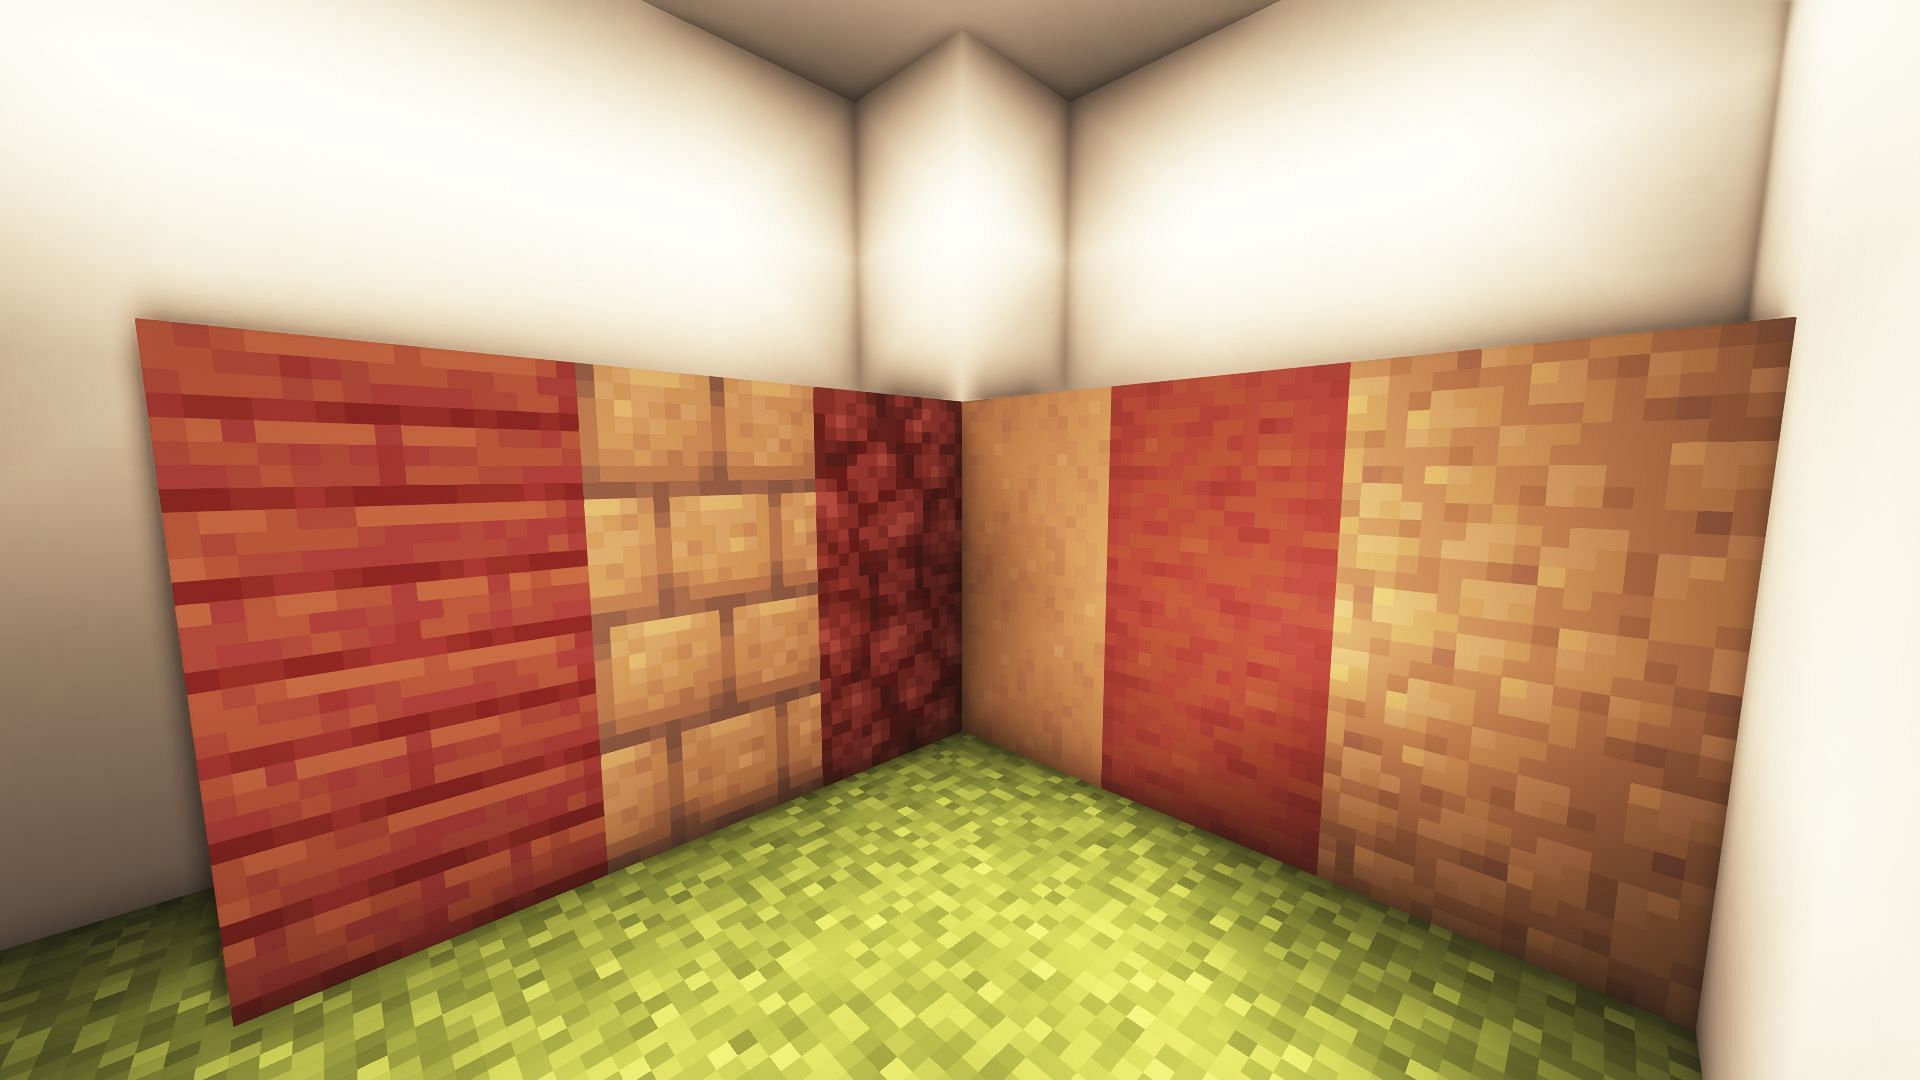 This block palette consists of red and light brown colored blocks (Image via Mojang)